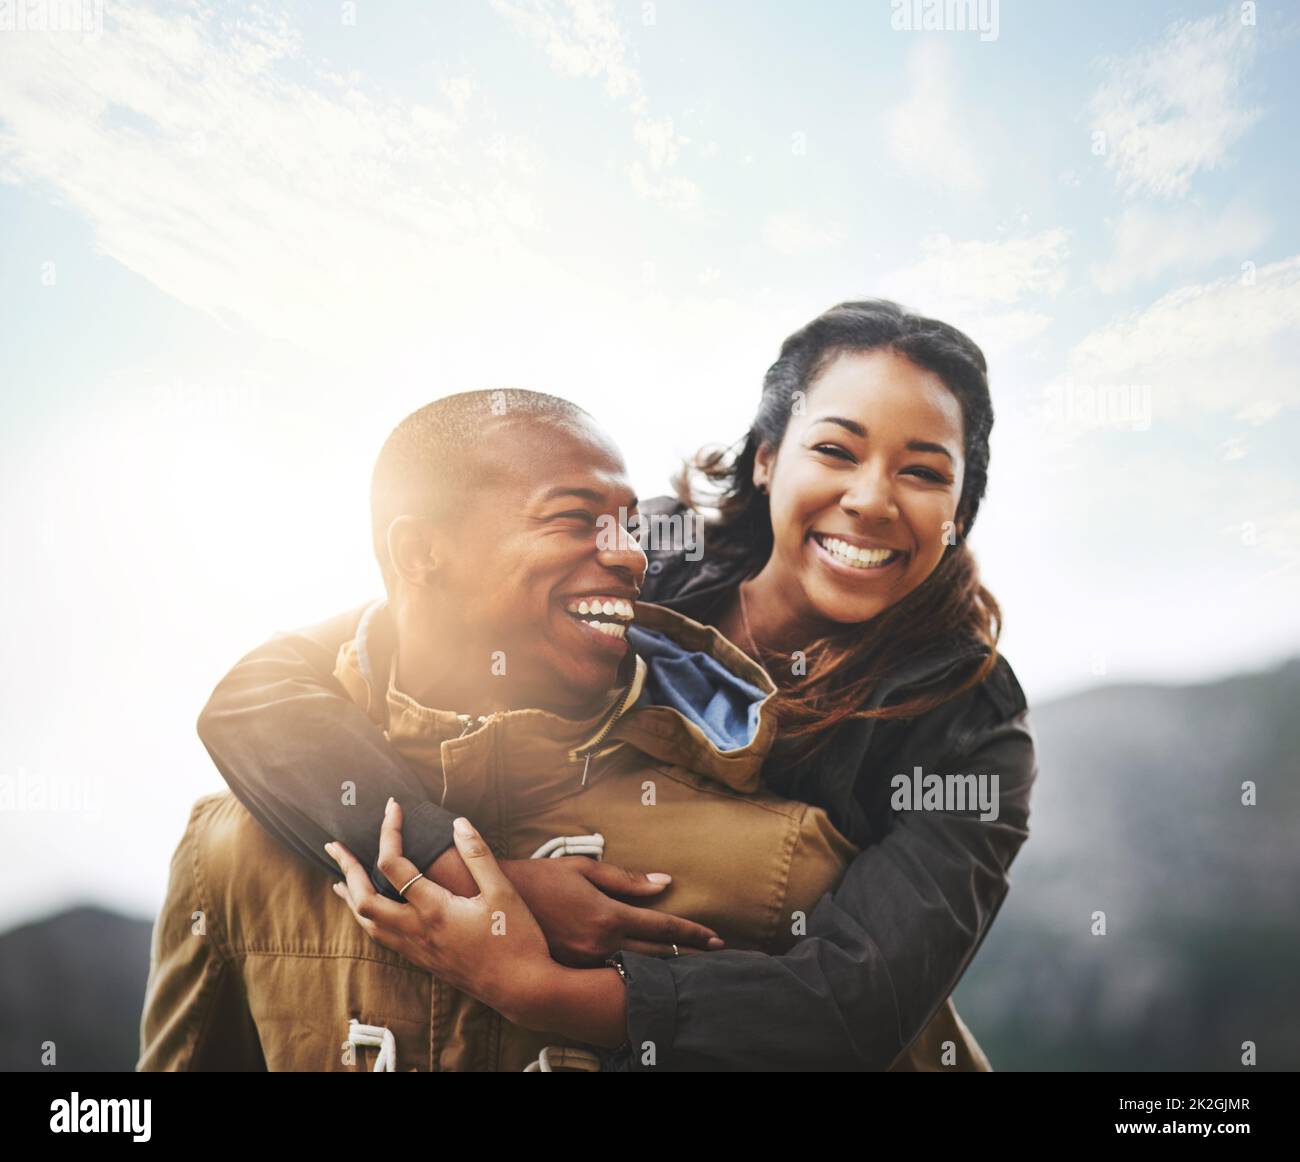 Making a moment for us. Portrait of a happy young couple having fun outside. Stock Photo